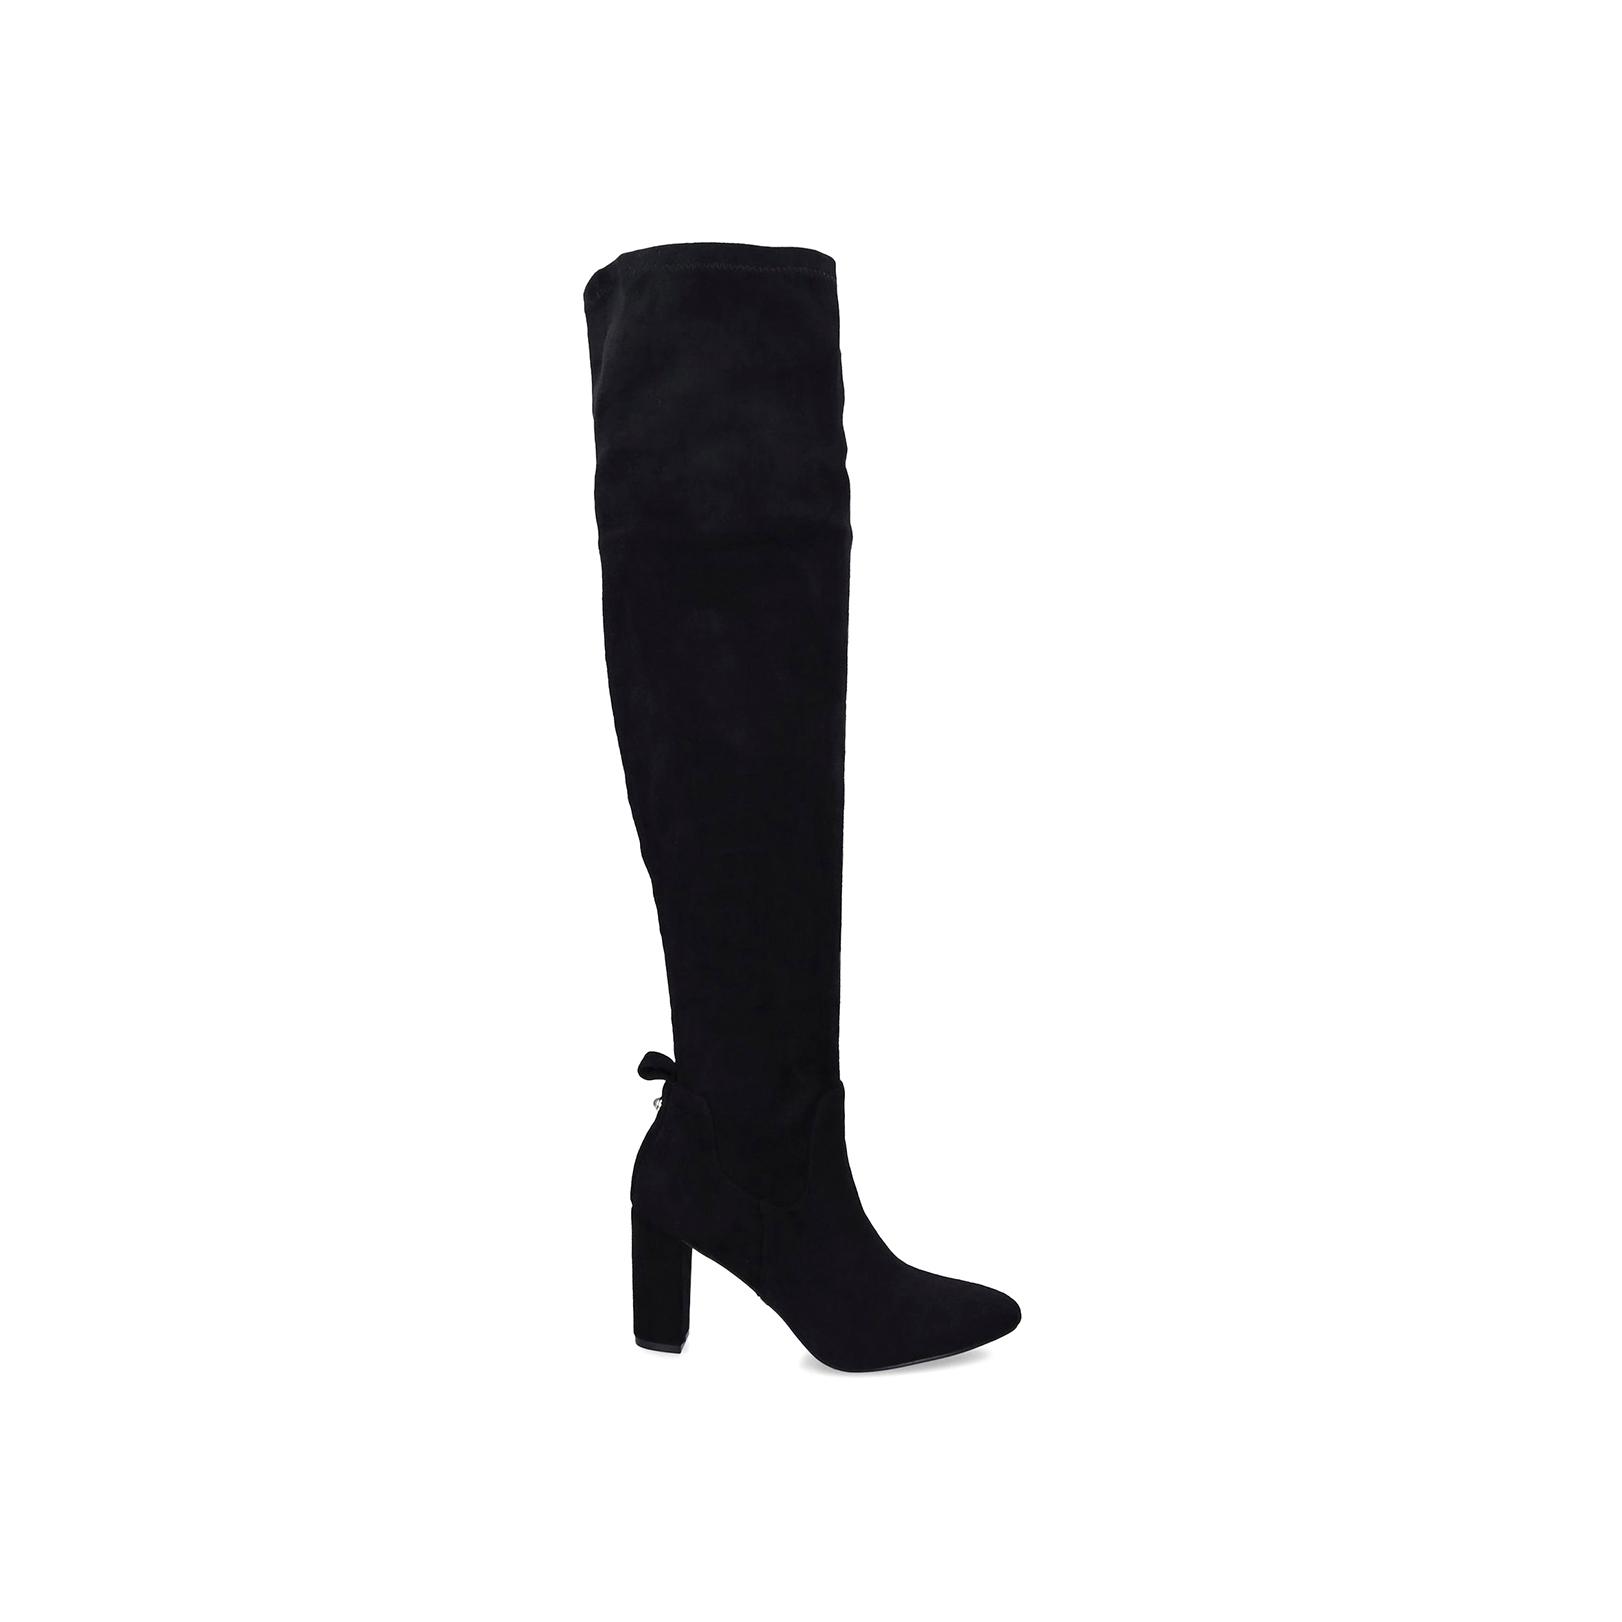 Page 7 | Women's Designer Boots | Heeled & Flat Boots | Shoeaholics